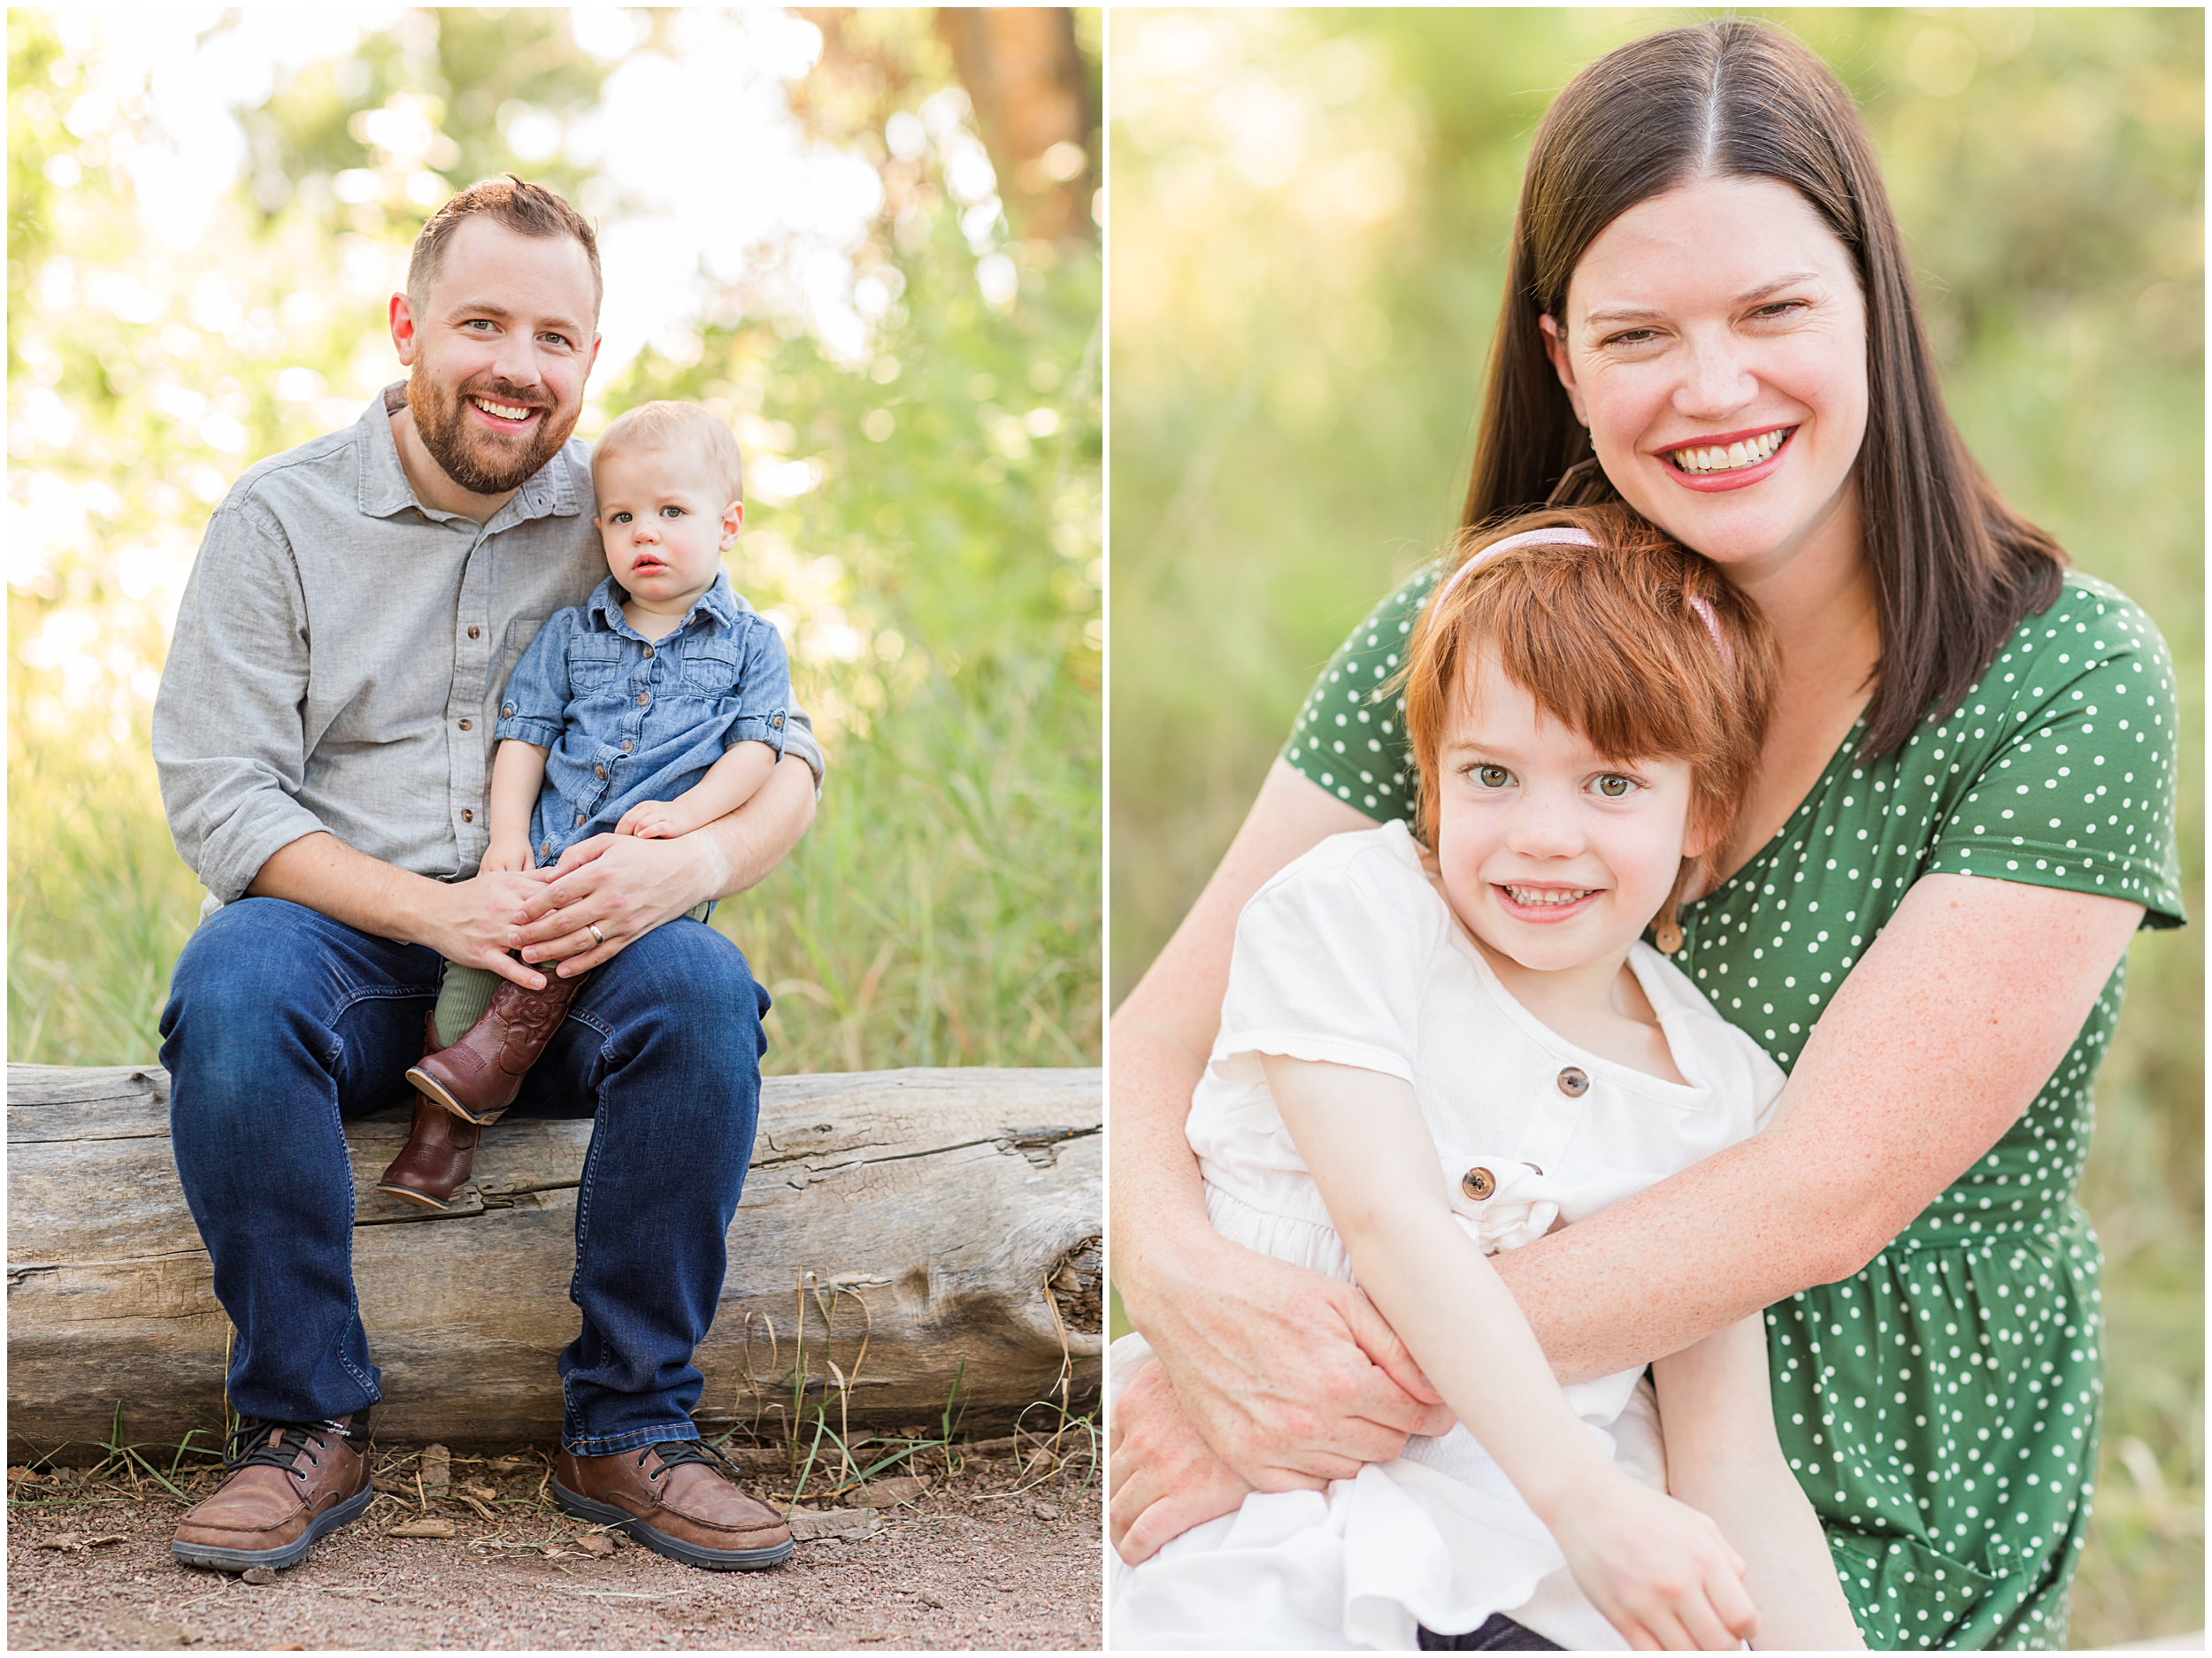 Parents hugging children in a joyful moment, captured in a mini family session by Theresa Pelser Photography